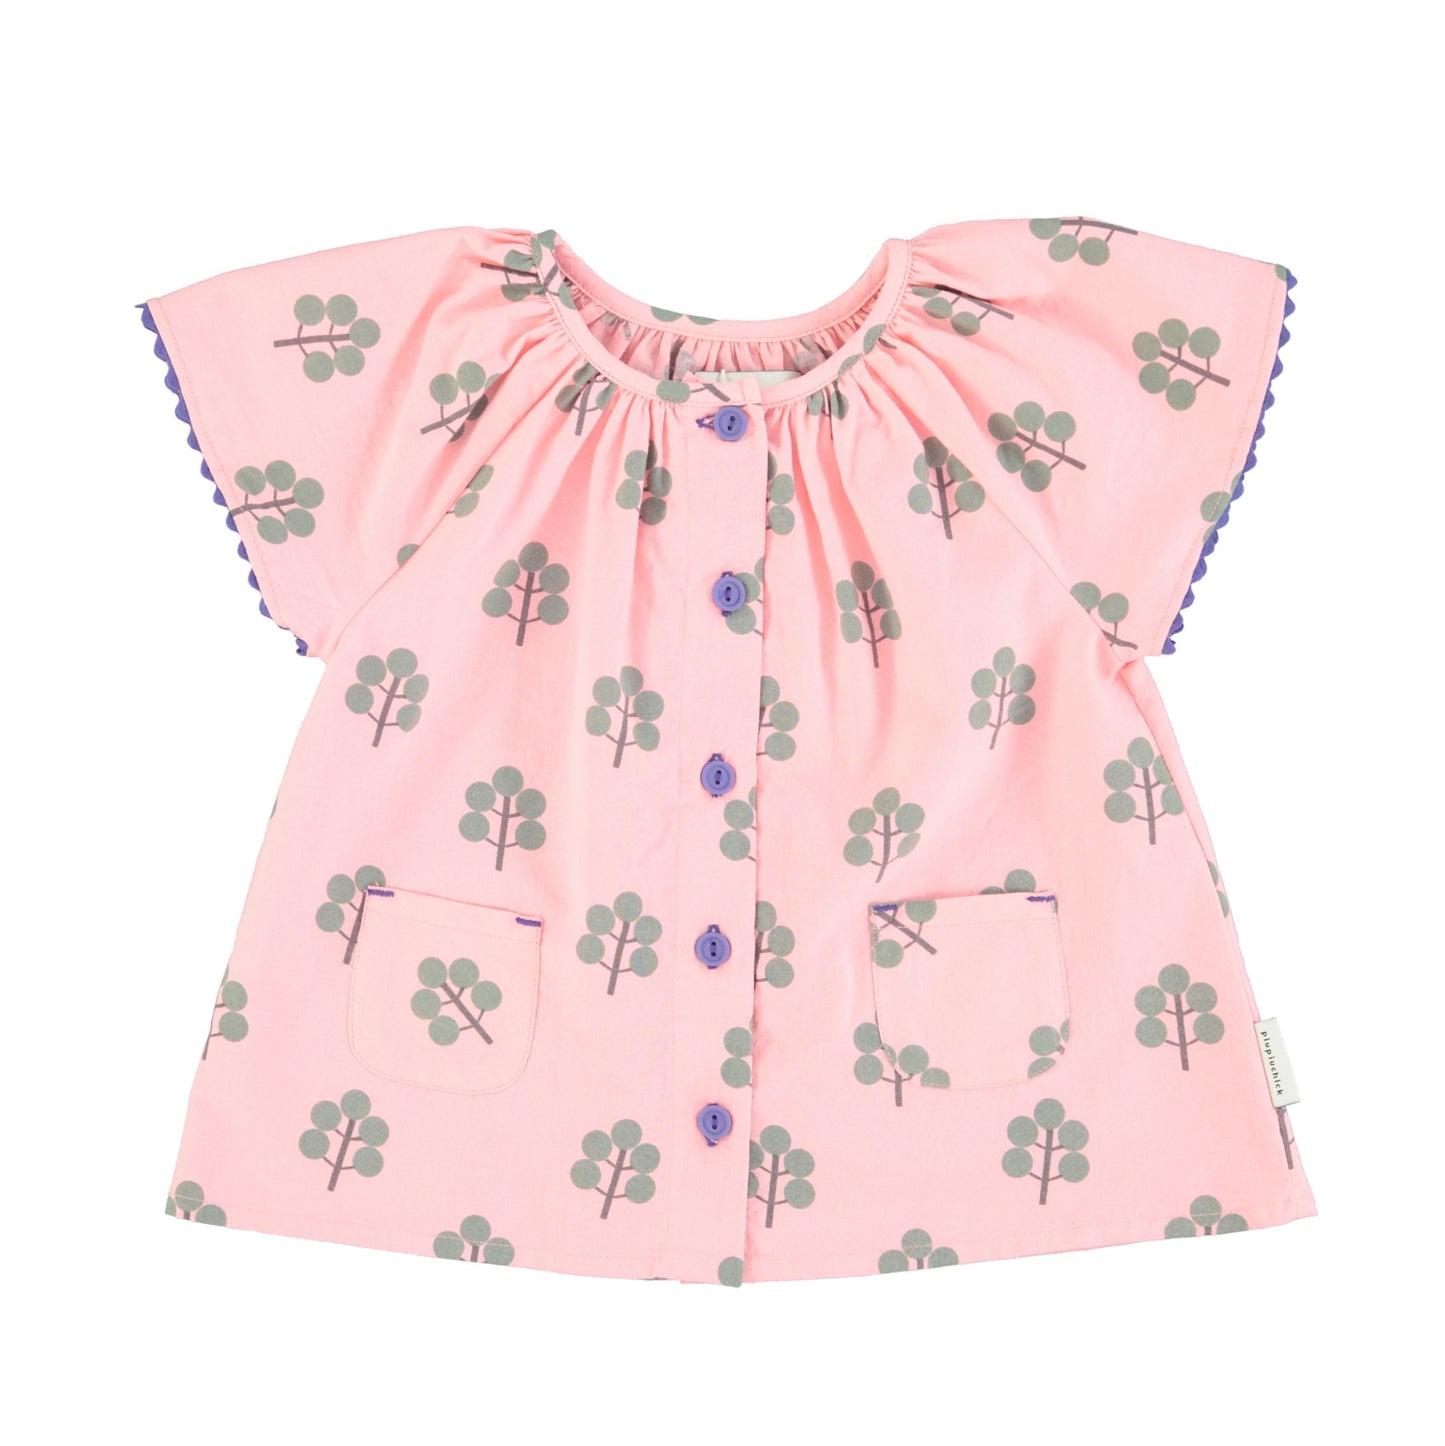 blouse w/ butterfly sleeves | pink w/ green trees